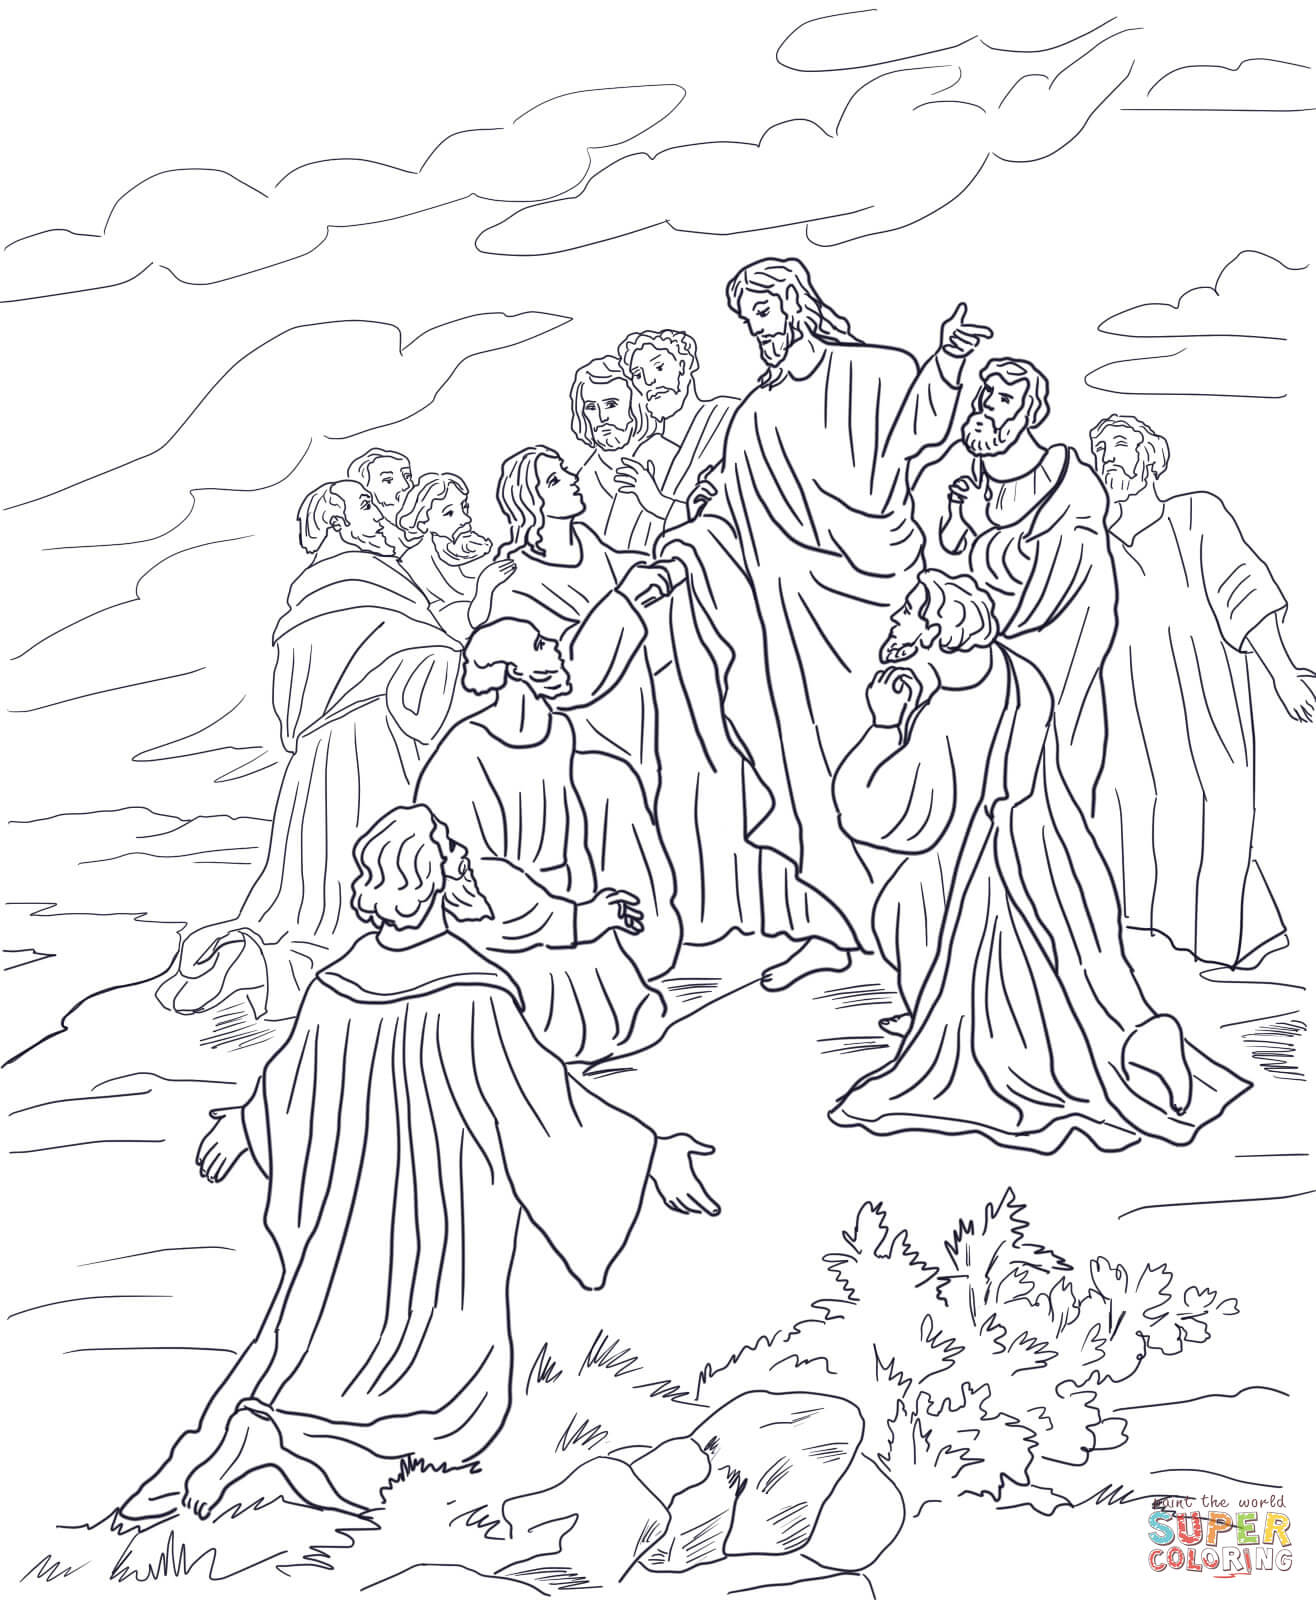 Resurrection Coloring Pages For Preschoolers Jesus Resurrection Coloring Pages Free Coloring Pages